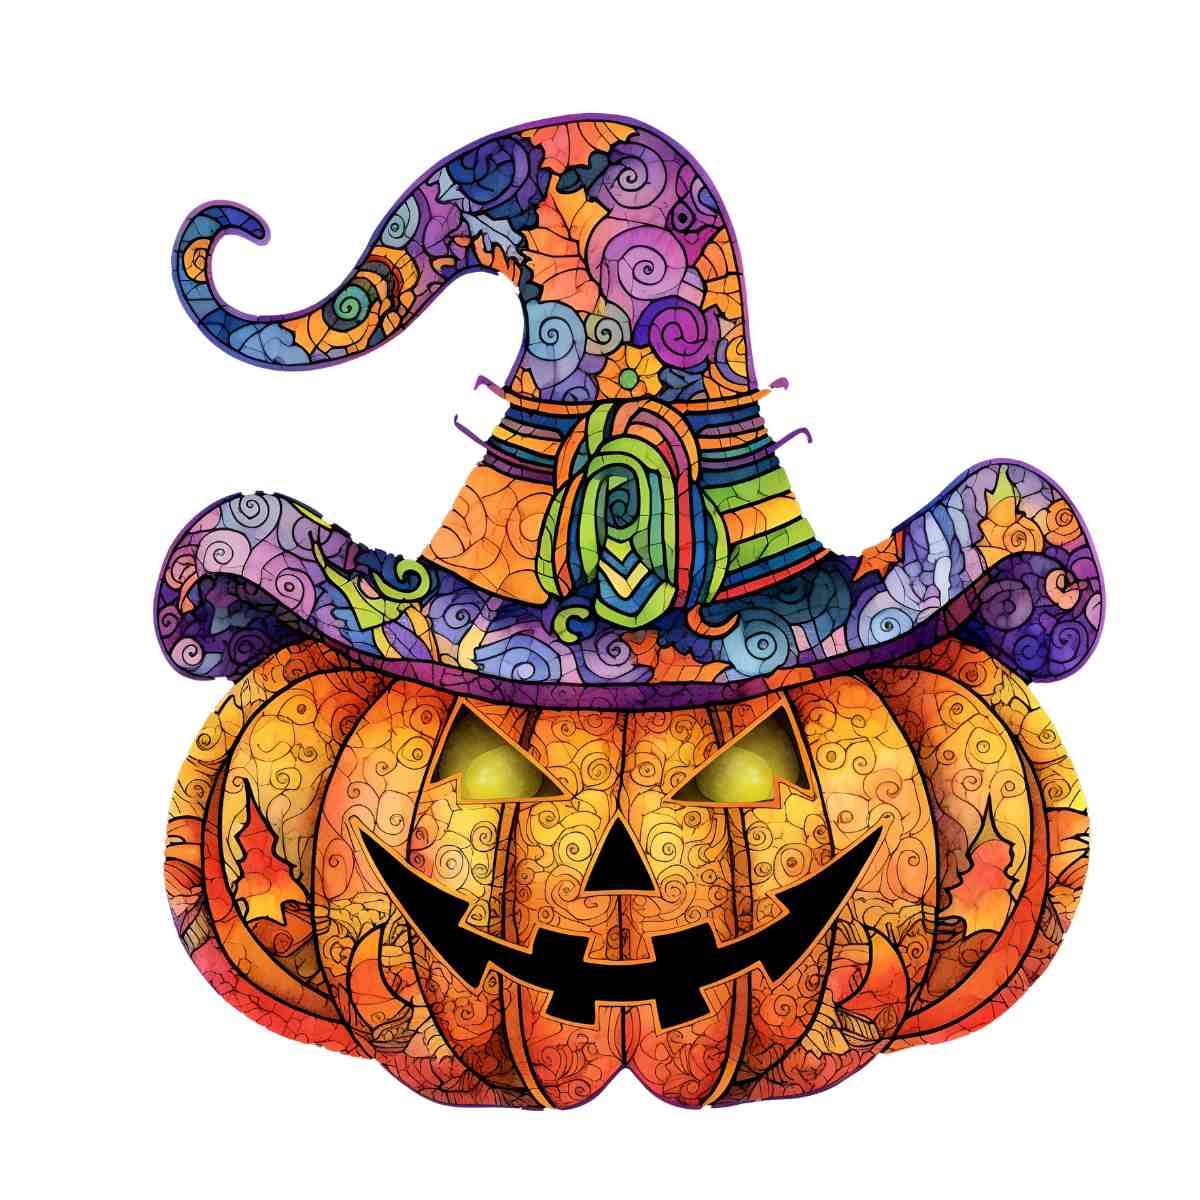 Animal Jigsaw Puzzle > Wooden Jigsaw Puzzle > Jigsaw Puzzle A5 Witchy Pumpkin Puzzle - Jigsaw Puzzle